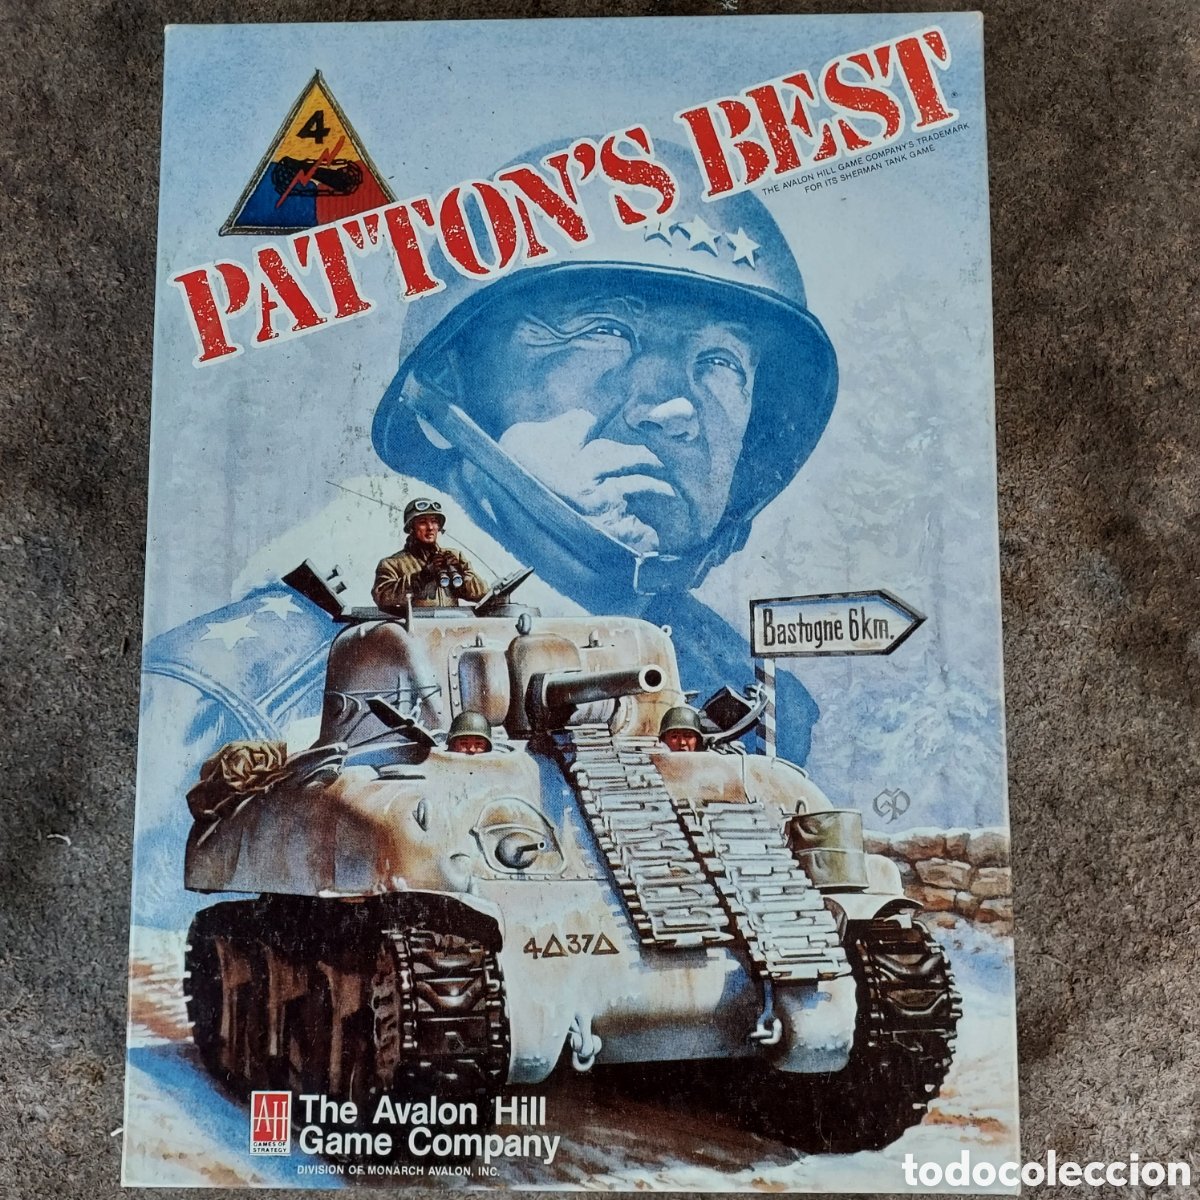 patton's de avalon hill. wargame solitario - Buy Other role-playing games and strategy games on todocoleccion